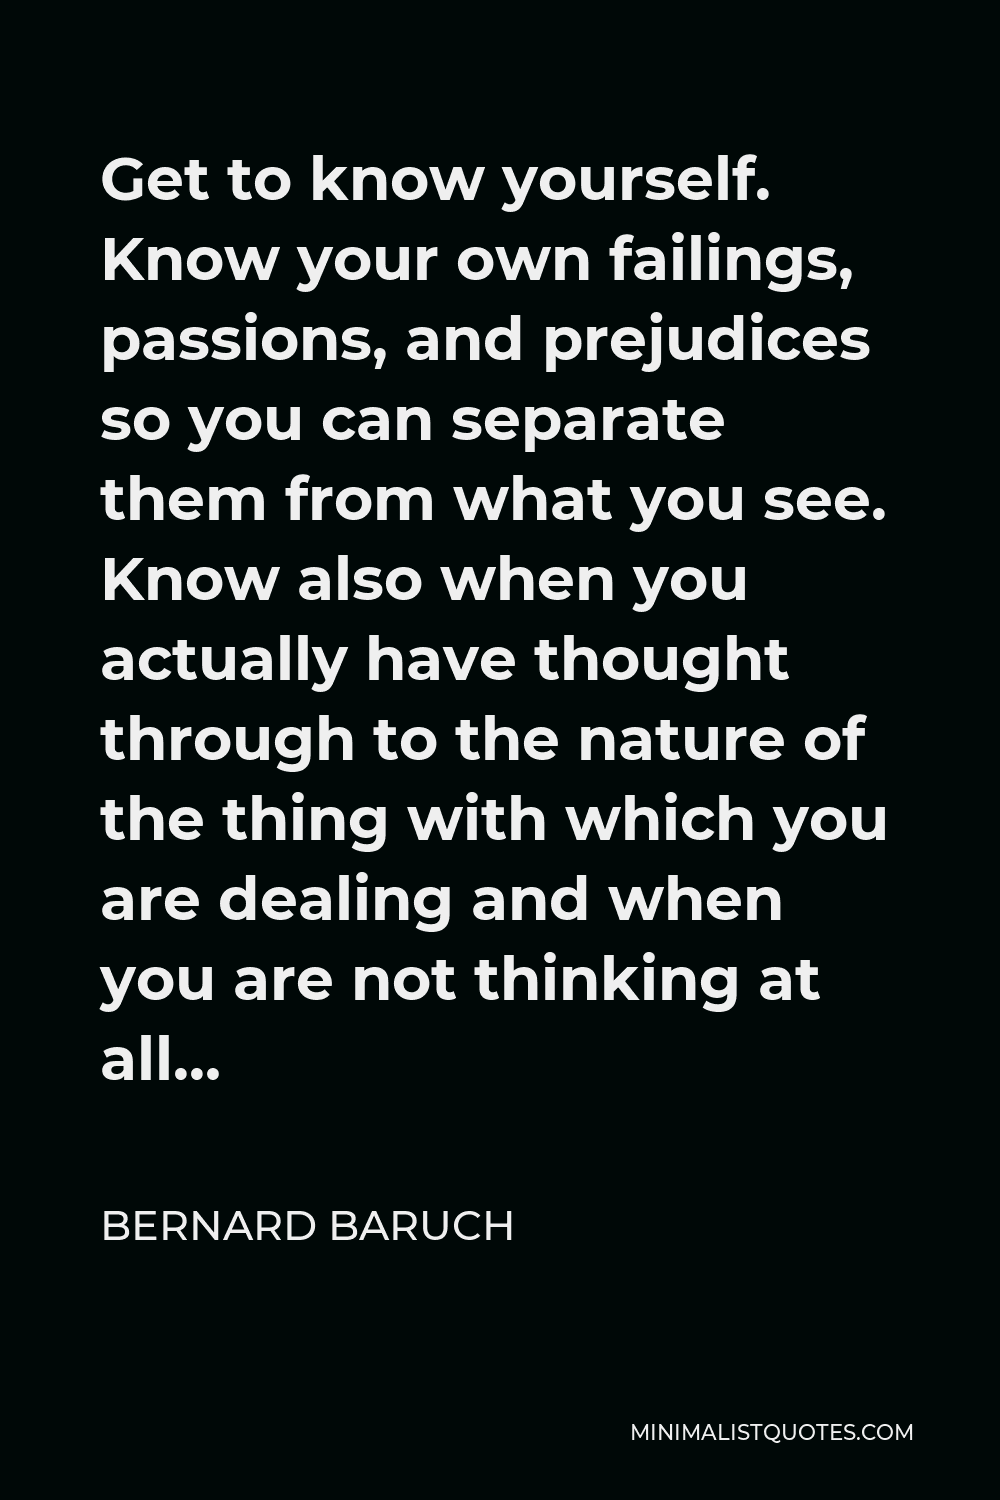 Bernard Baruch Quote - Get to know yourself. Know your own failings, passions, and prejudices so you can separate them from what you see. Know also when you actually have thought through to the nature of the thing with which you are dealing and when you are not thinking at all…